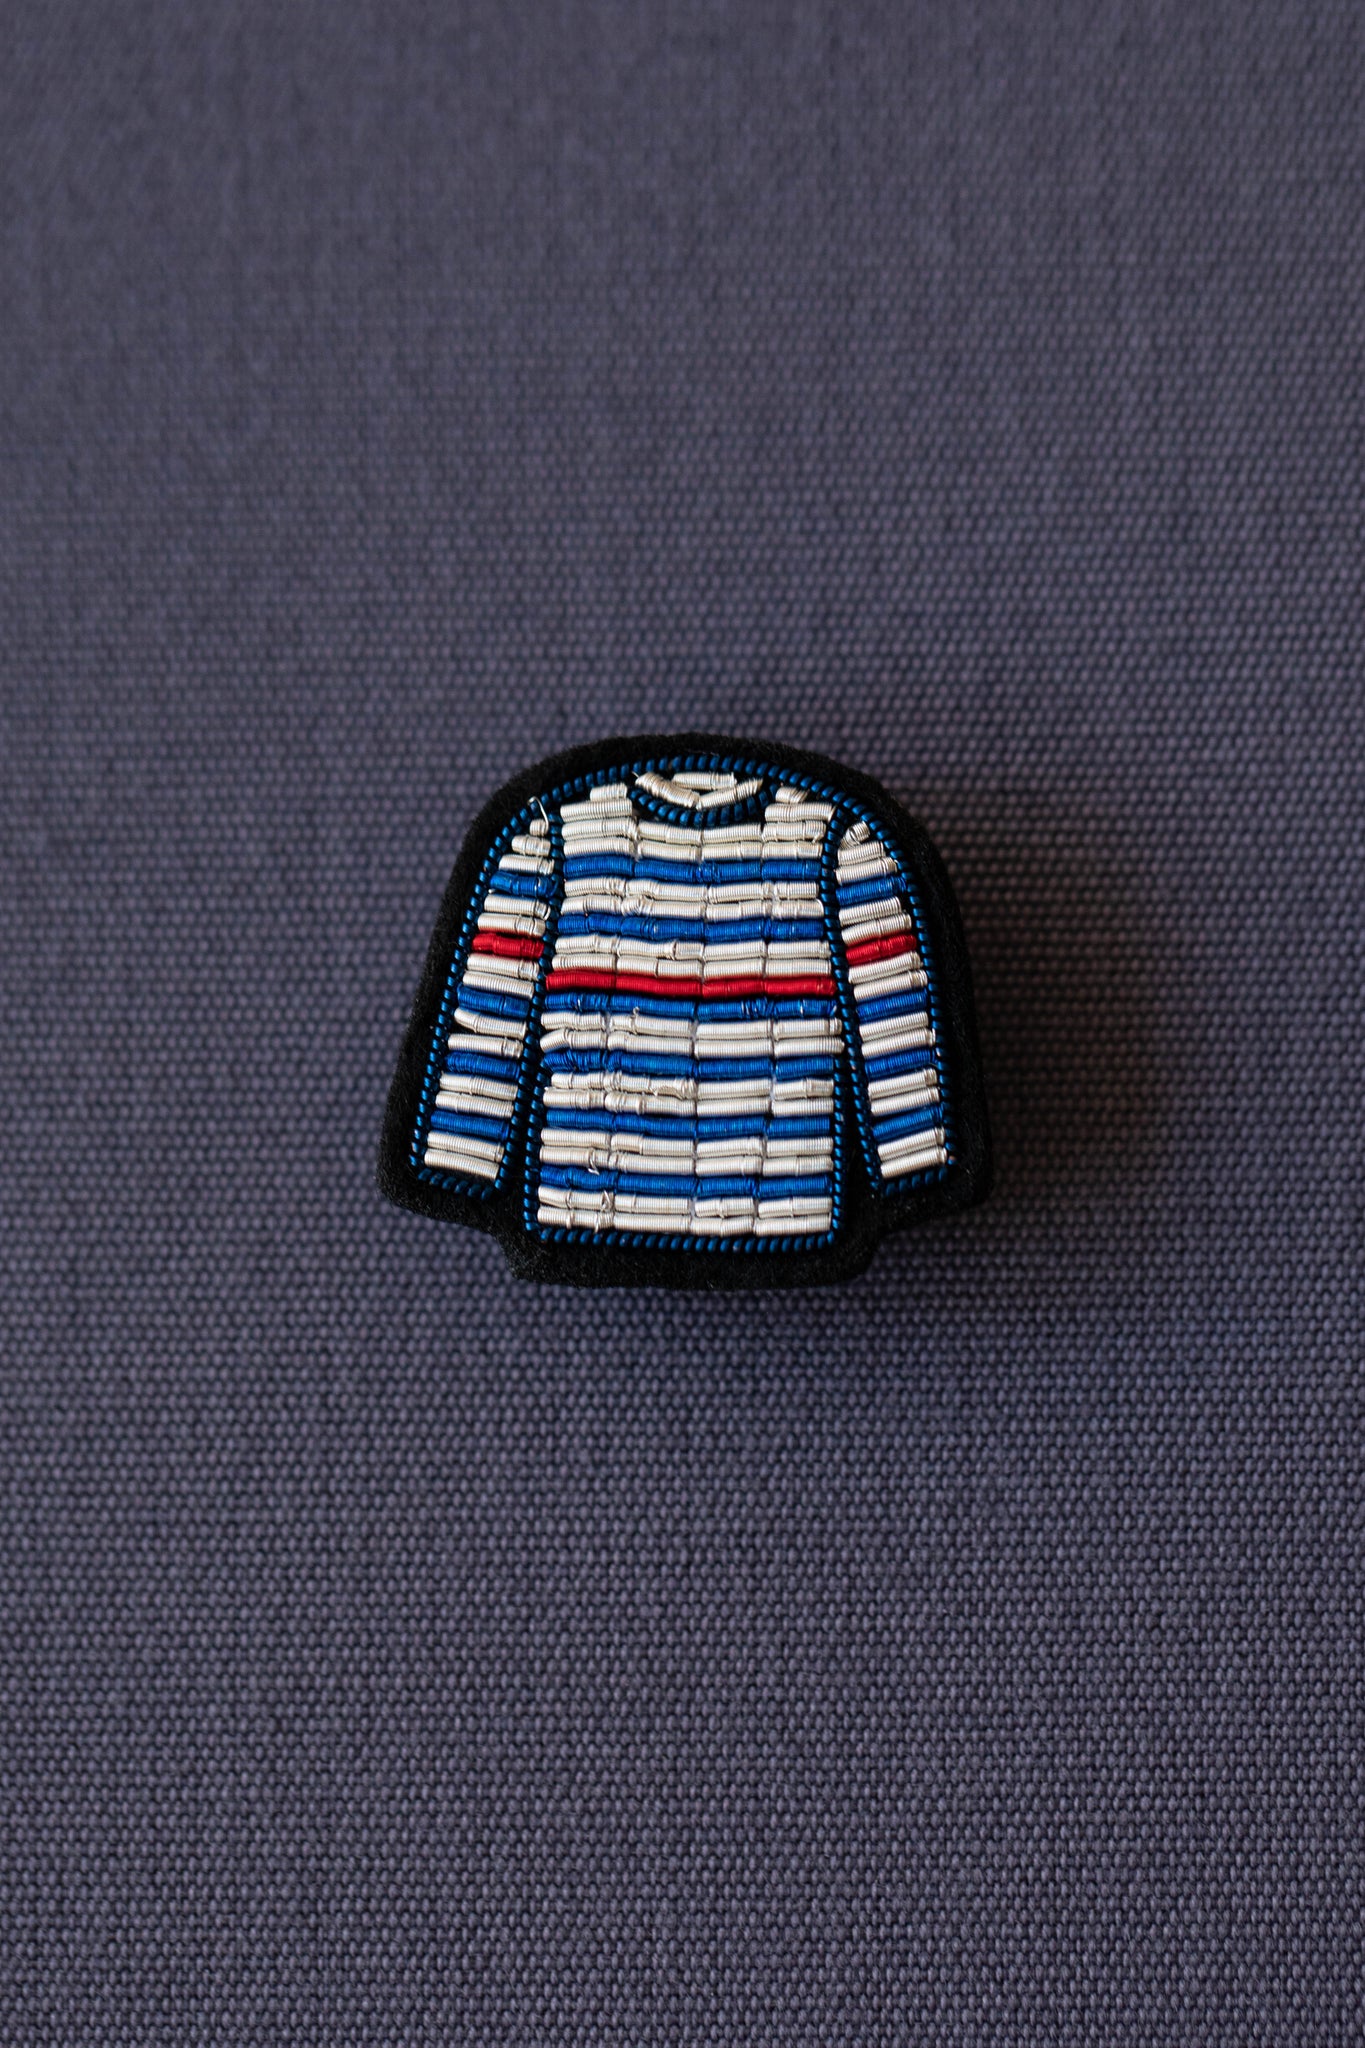 Embroidered Pins- Wear